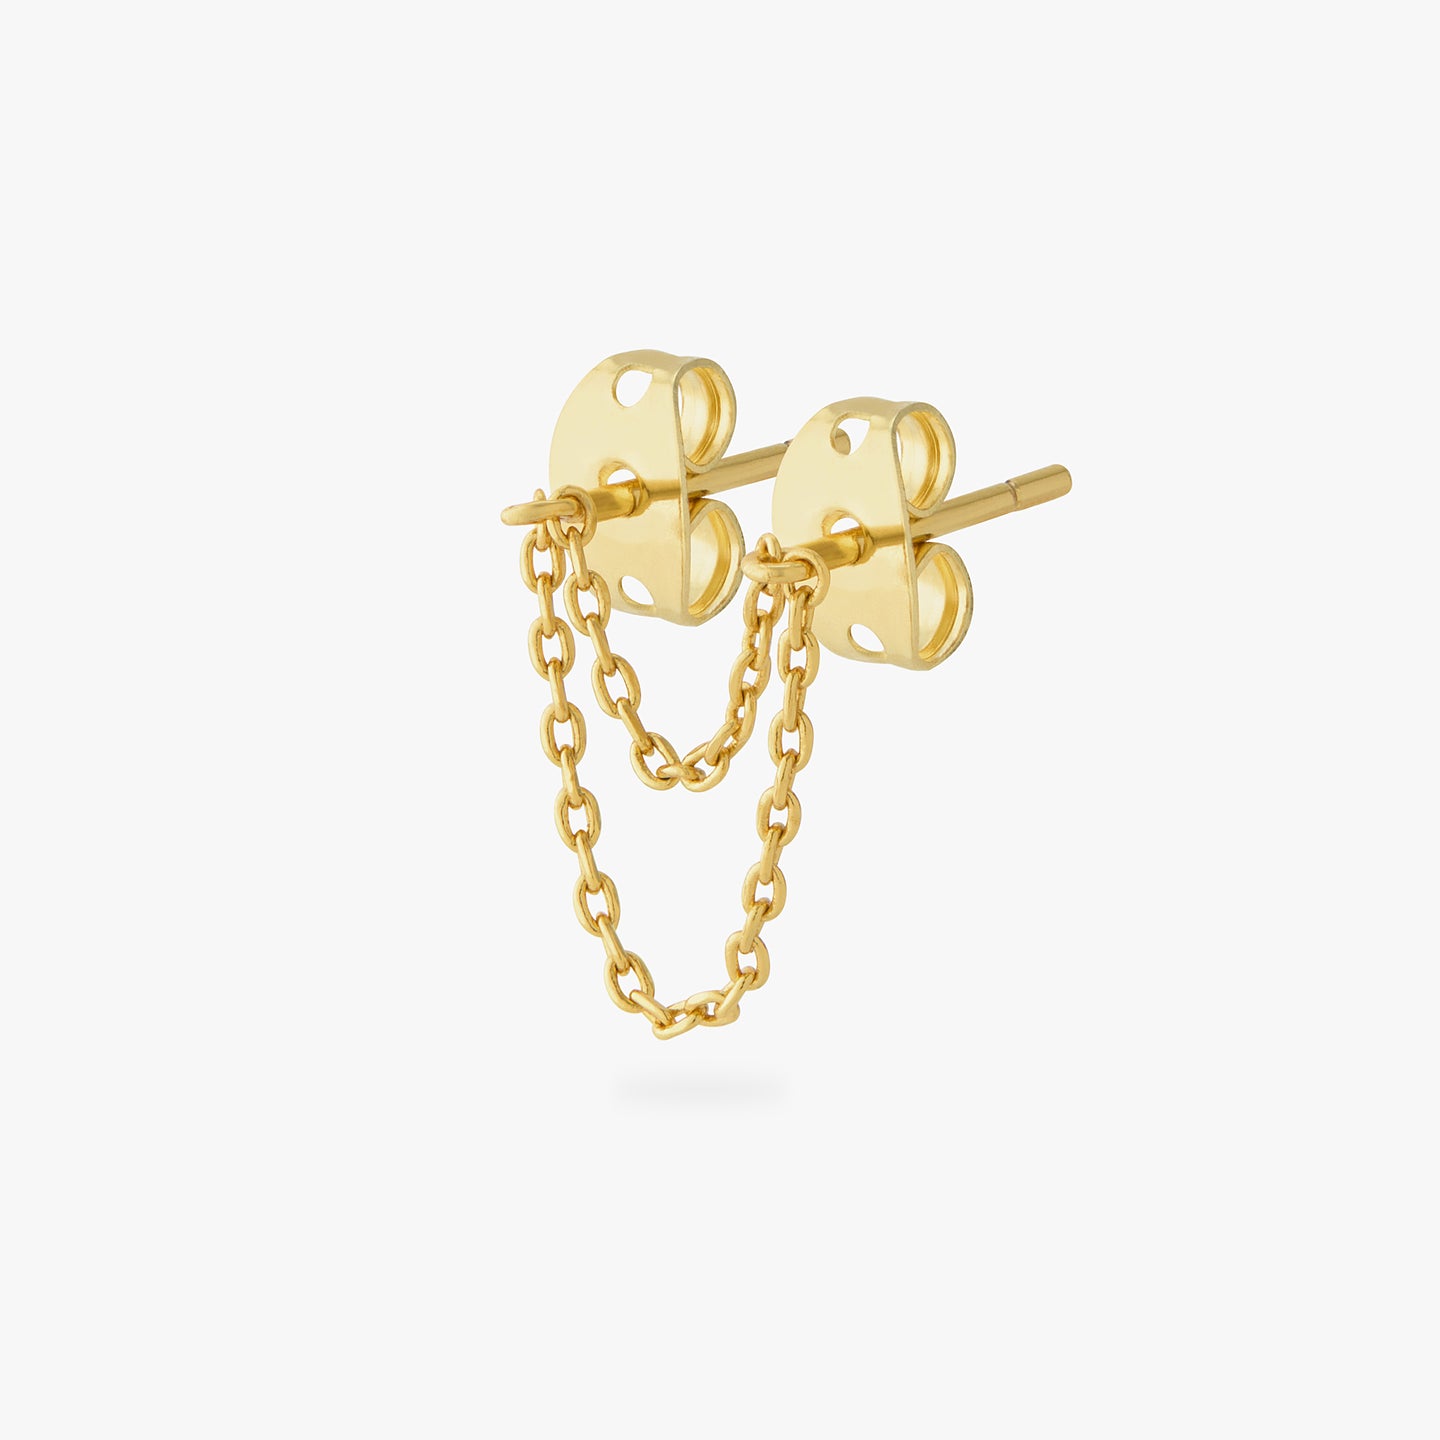 A gold double chain connector earring. color:null|gold